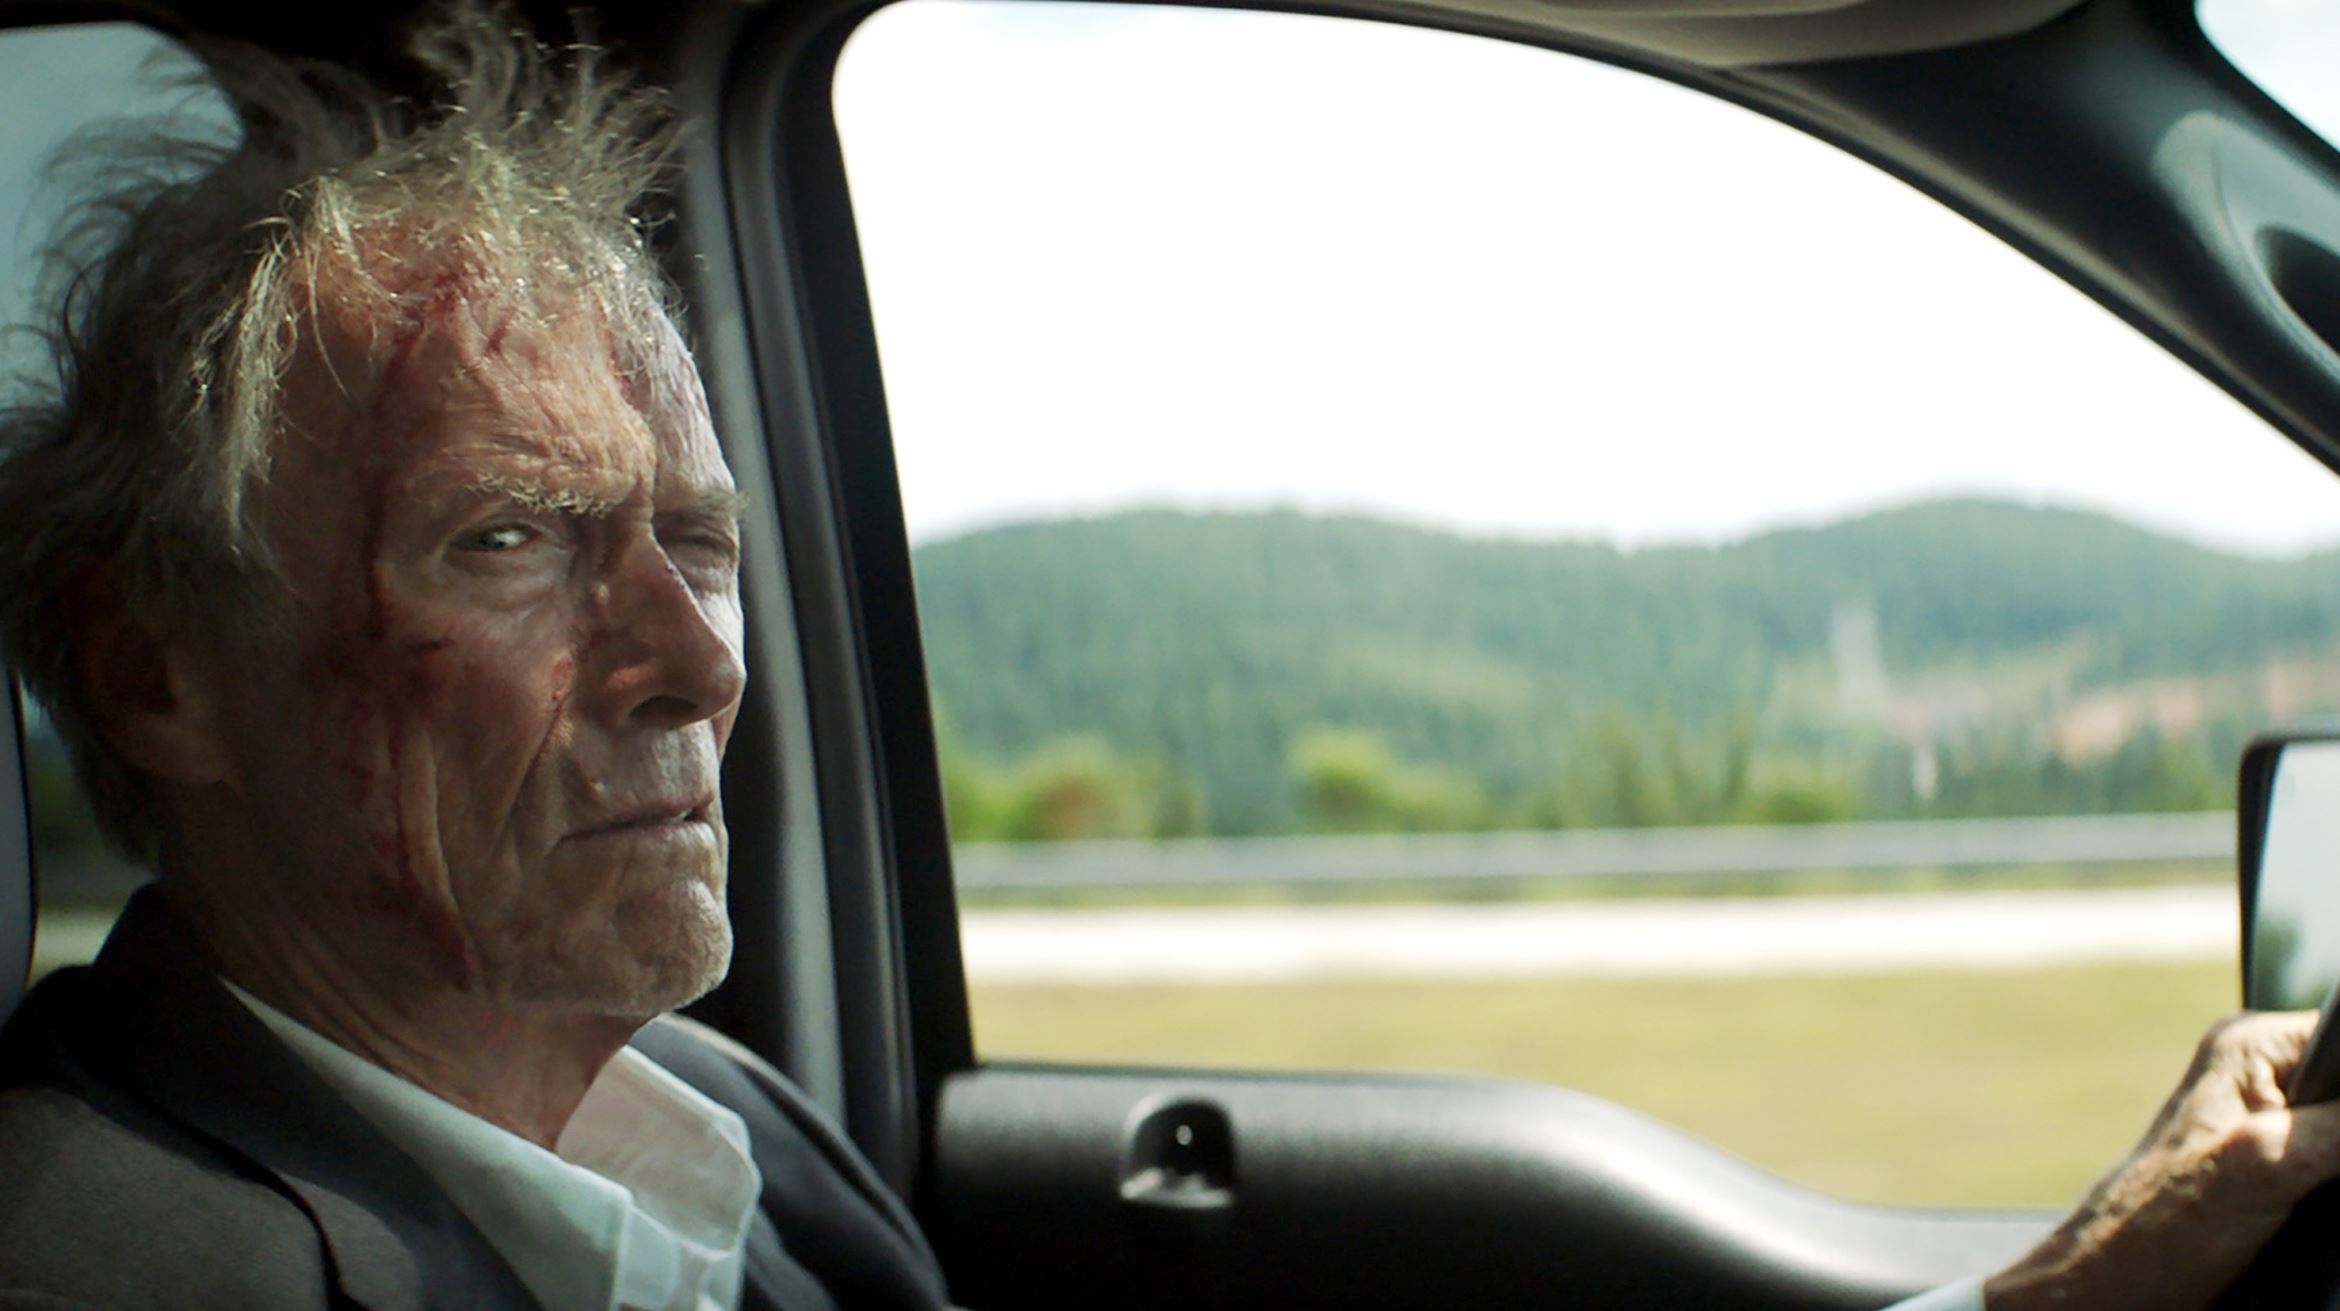 Clint Eastwood in "The Mule" - 